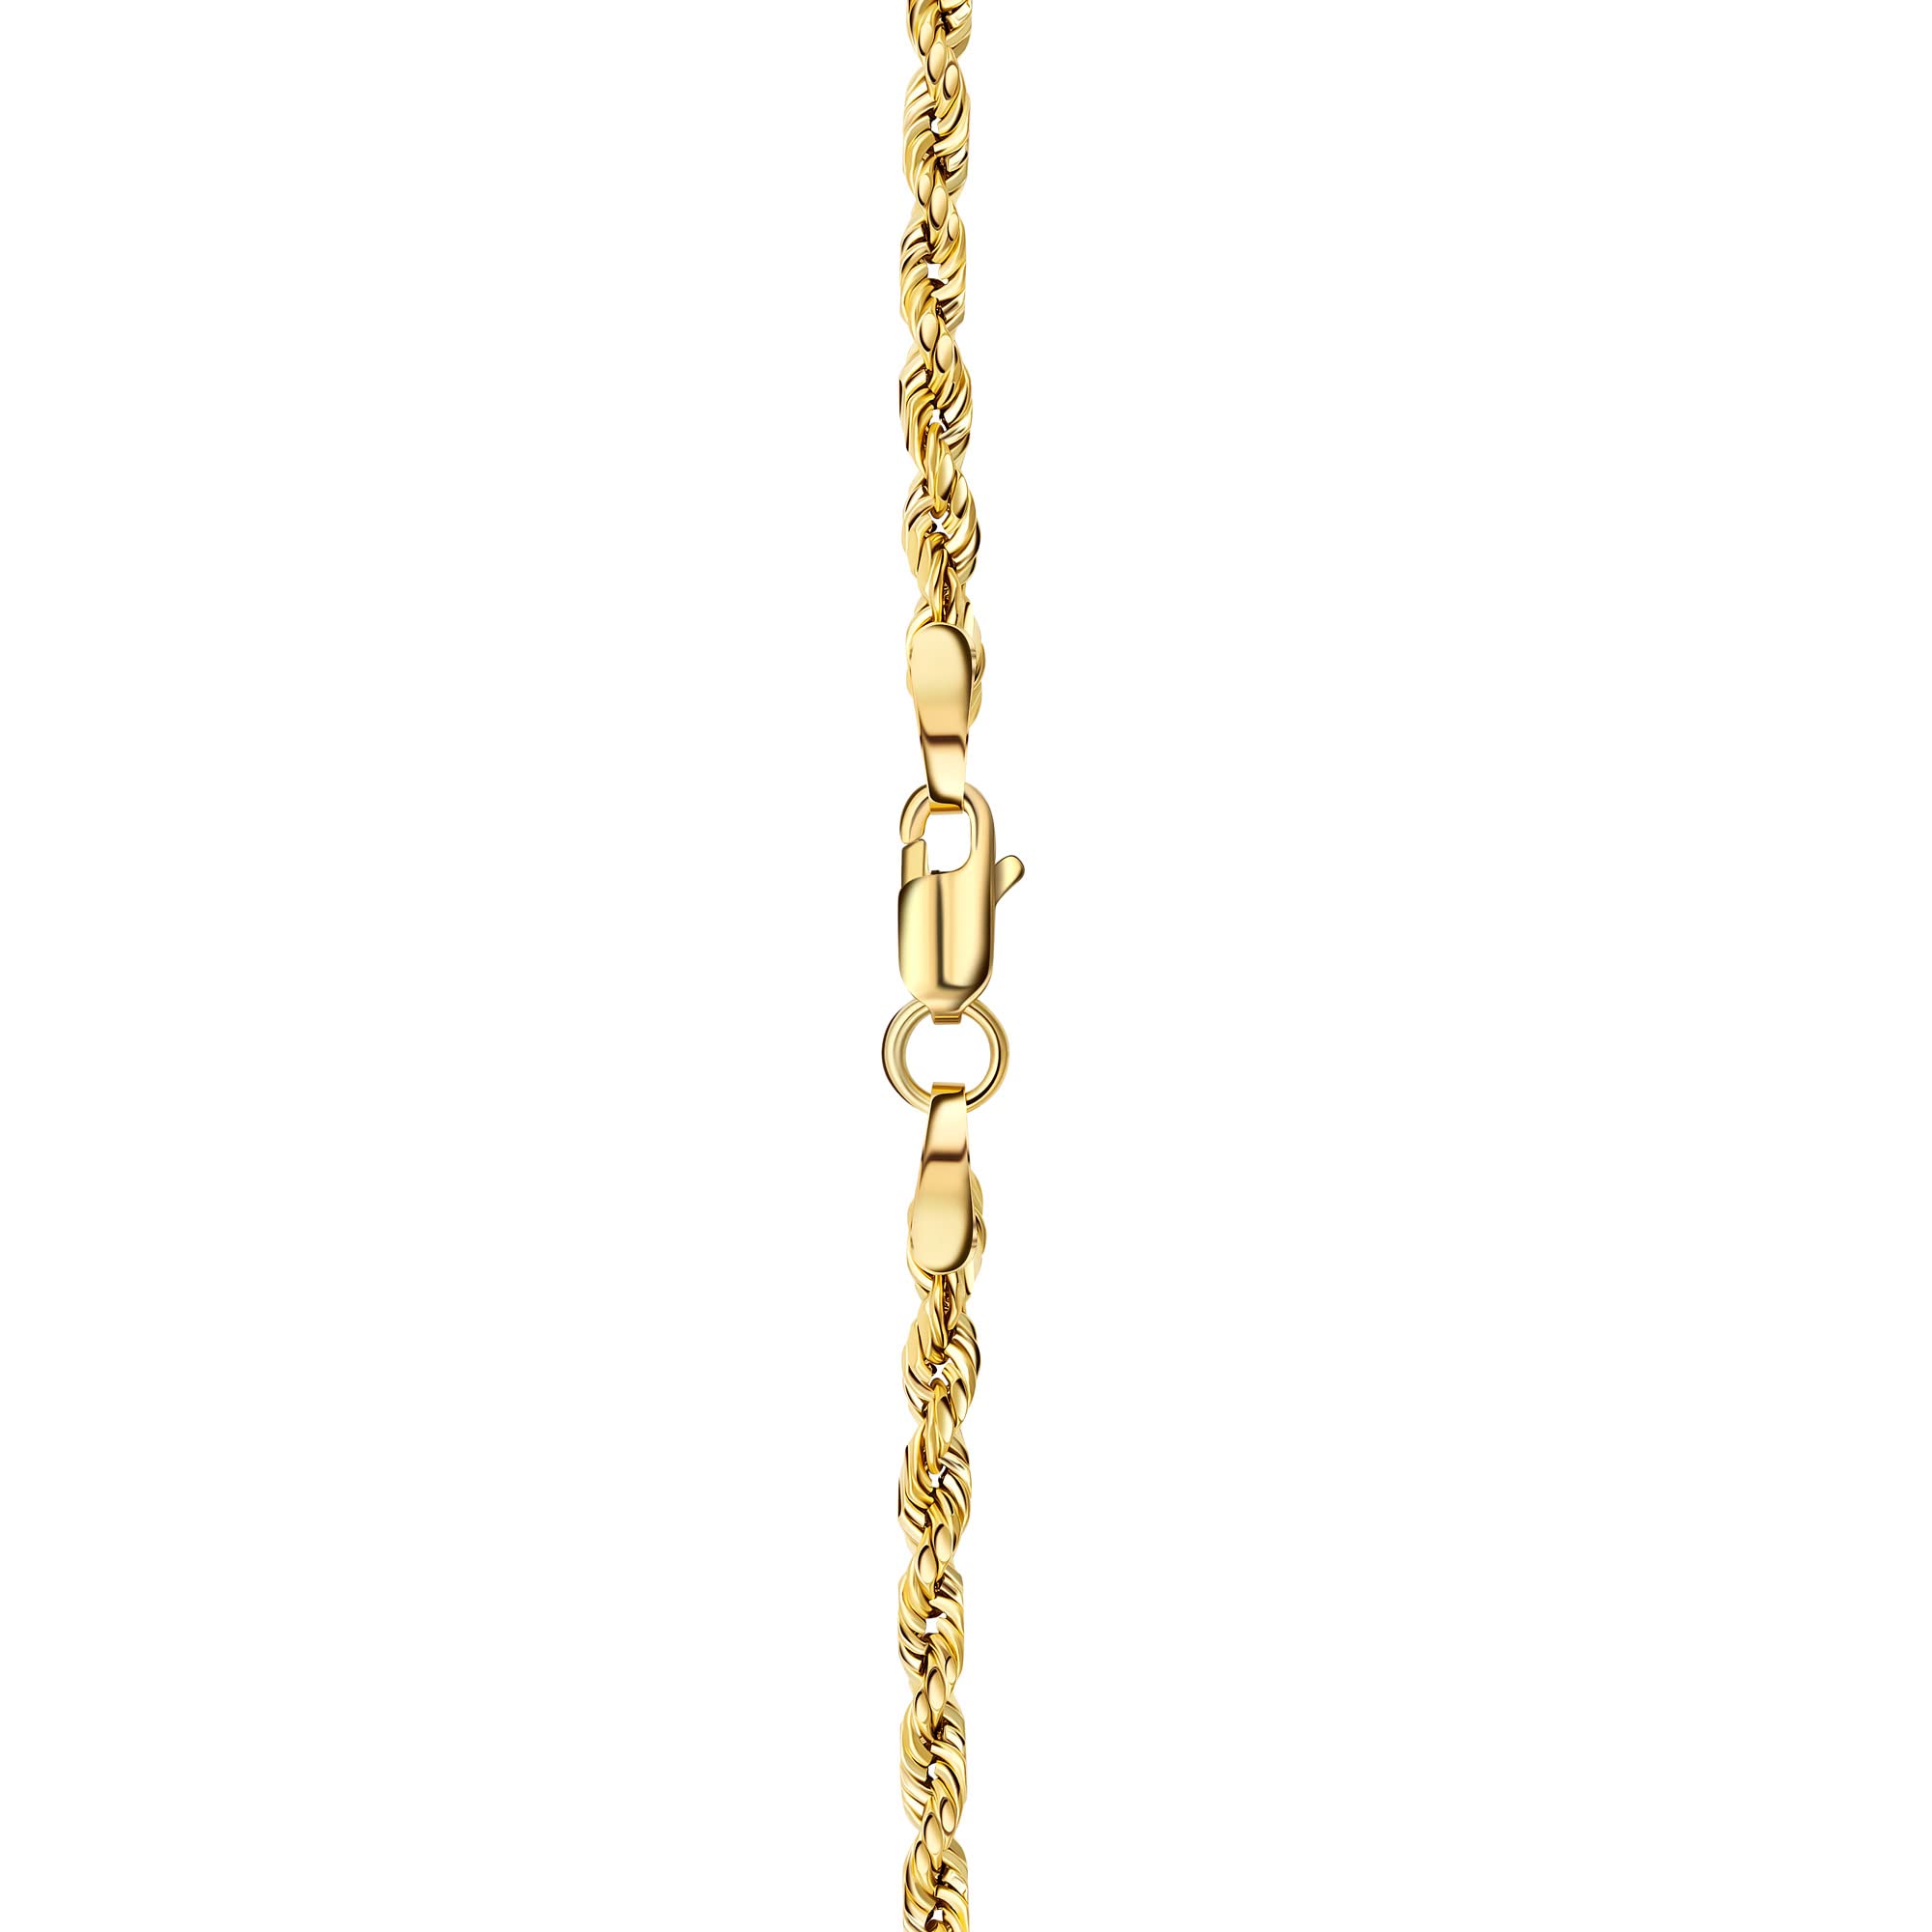 PORI JEWELERS 10K Yellow Gold 1.5MM,2MM,2.5MM,3MM,3.5,4MM,5MM,7MM, Diamond Cut Rope Chain Necklace Unisex Sizes 16